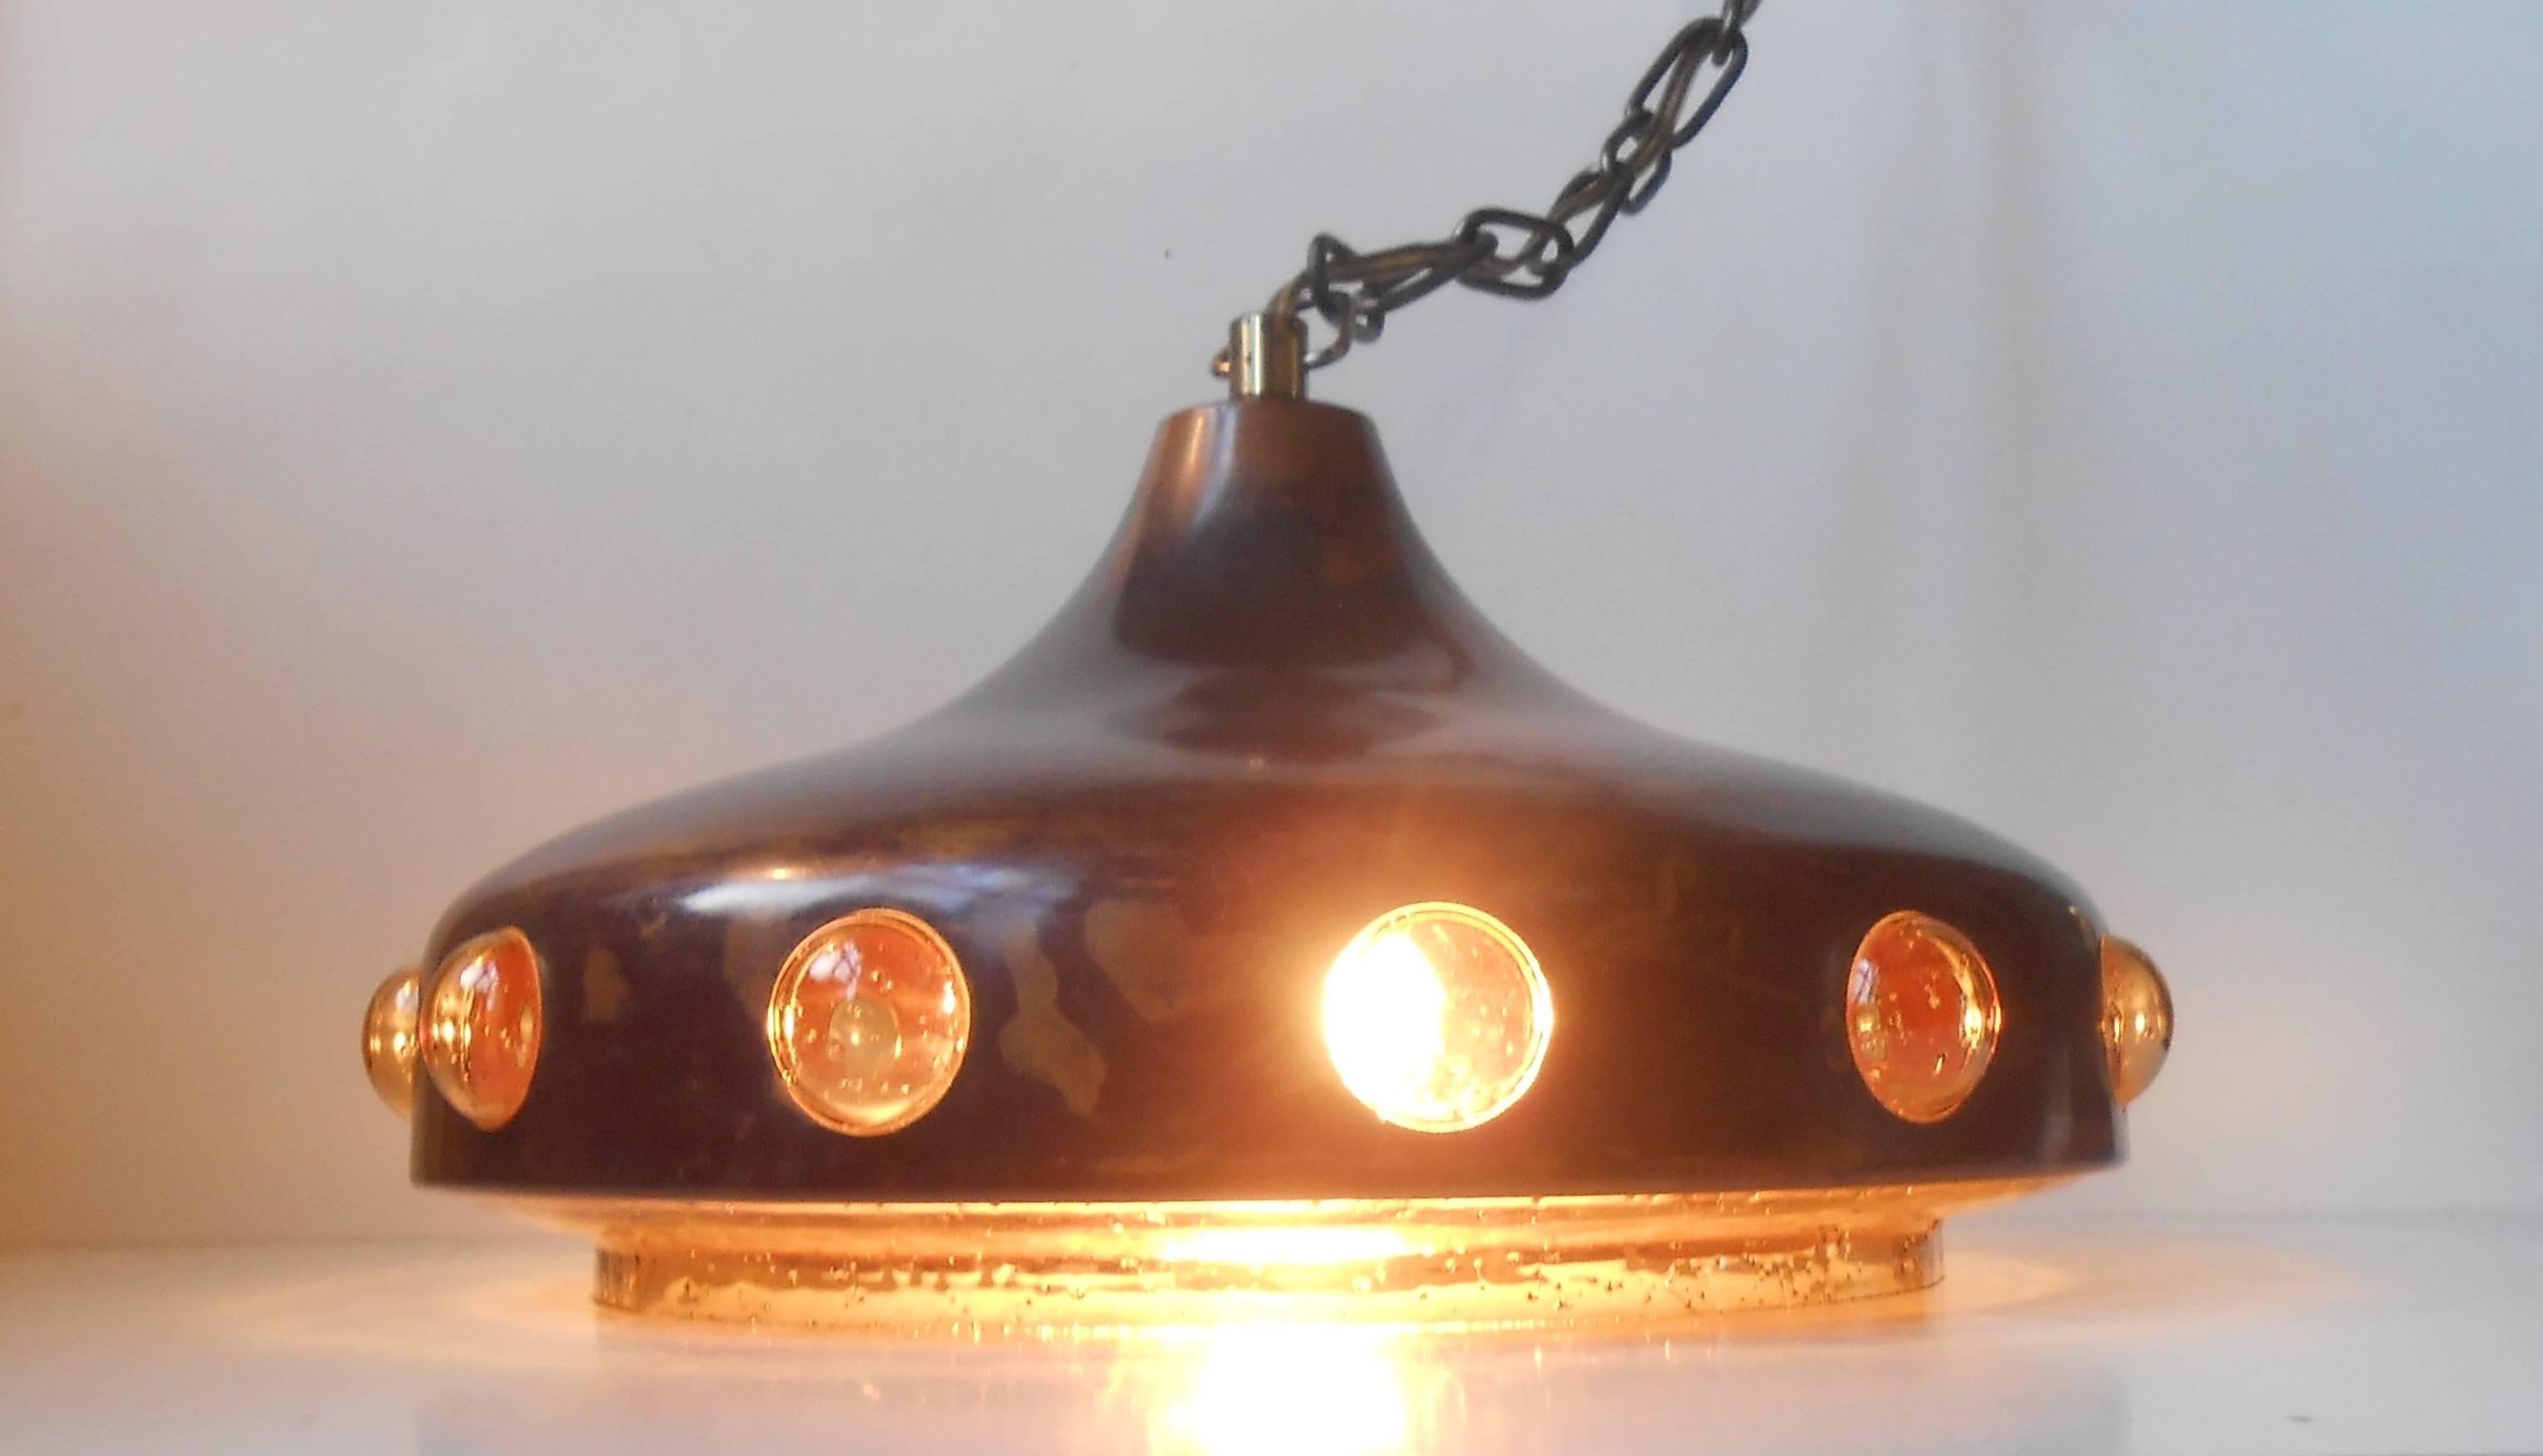 A Mid-Century classic by one of the important modern finnish designers. Nanny Still designed for RAAK in the 1960s. Acid Threated copper outer-shade lined with amber handblown glass. Original brass chain and ceiling cover/can are included in the